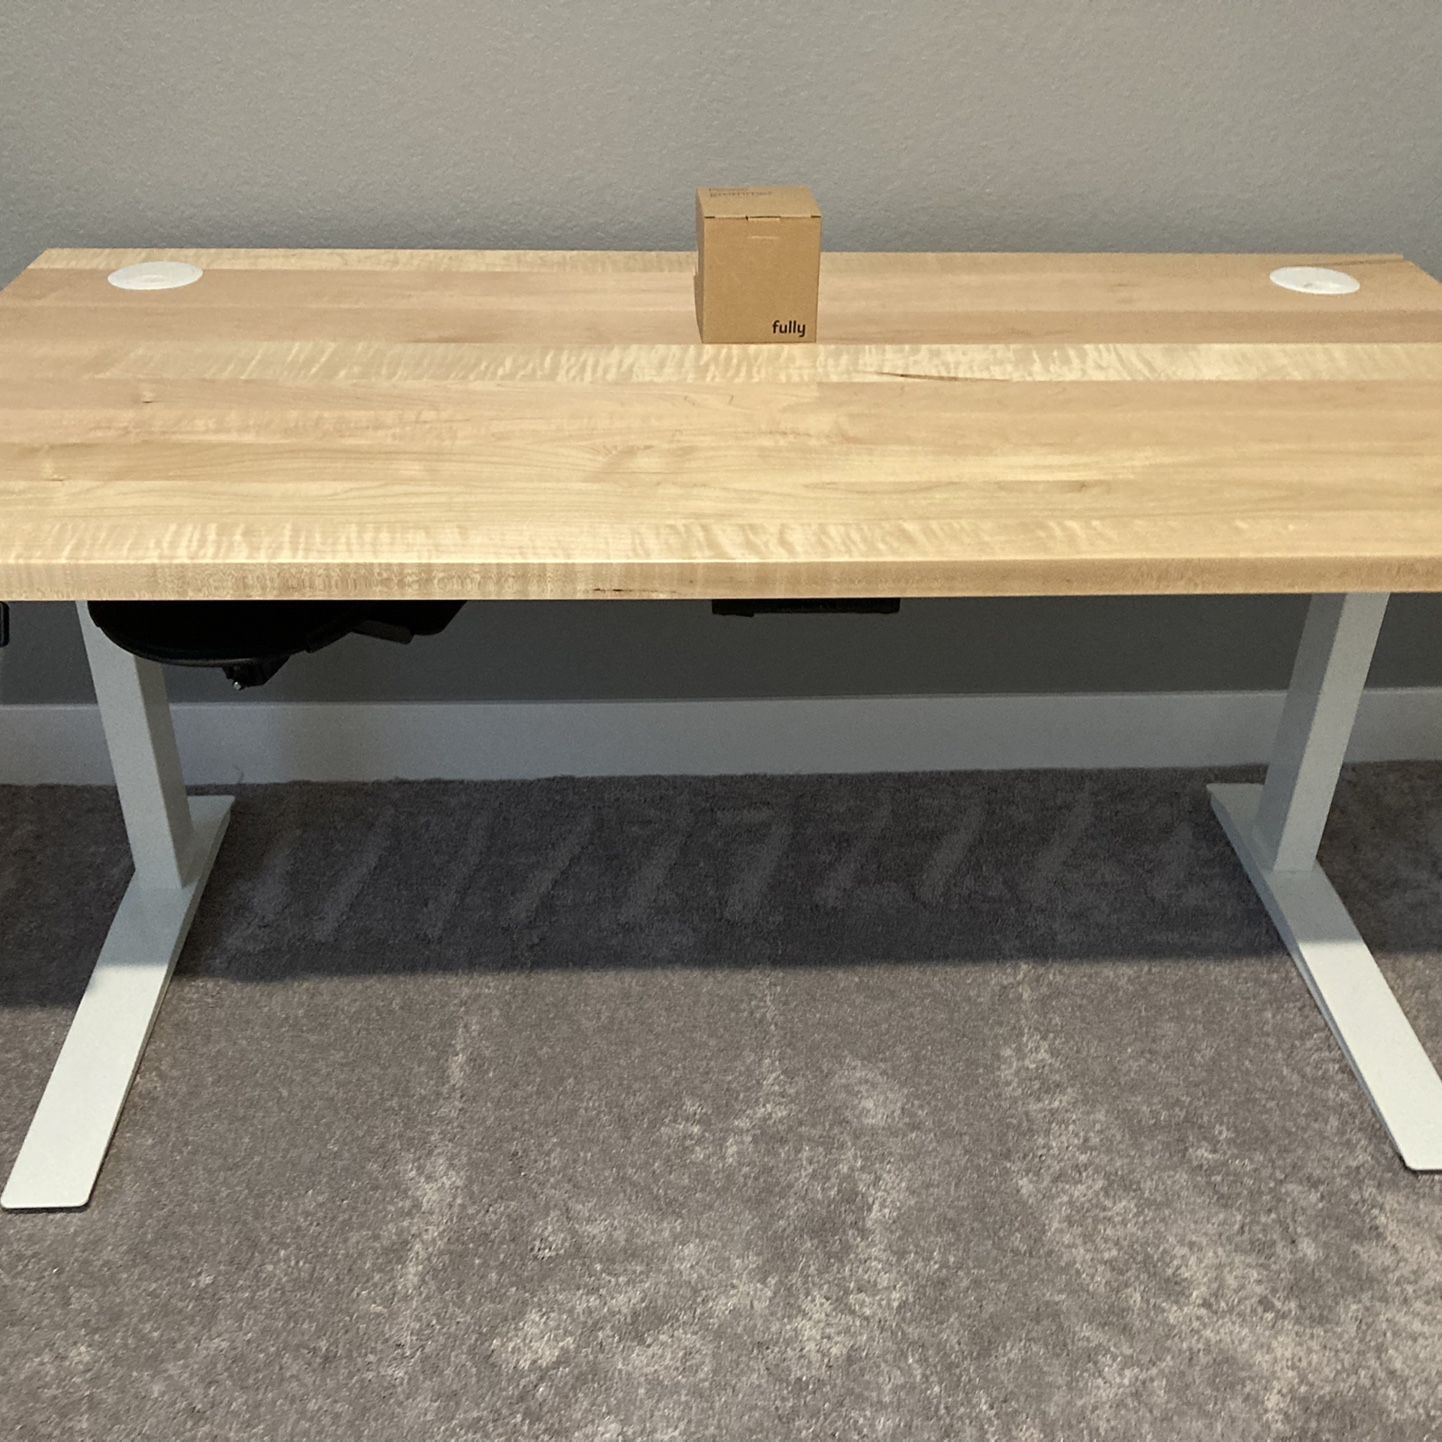 Fully Standing Desk - Solid Maple (Brand New)